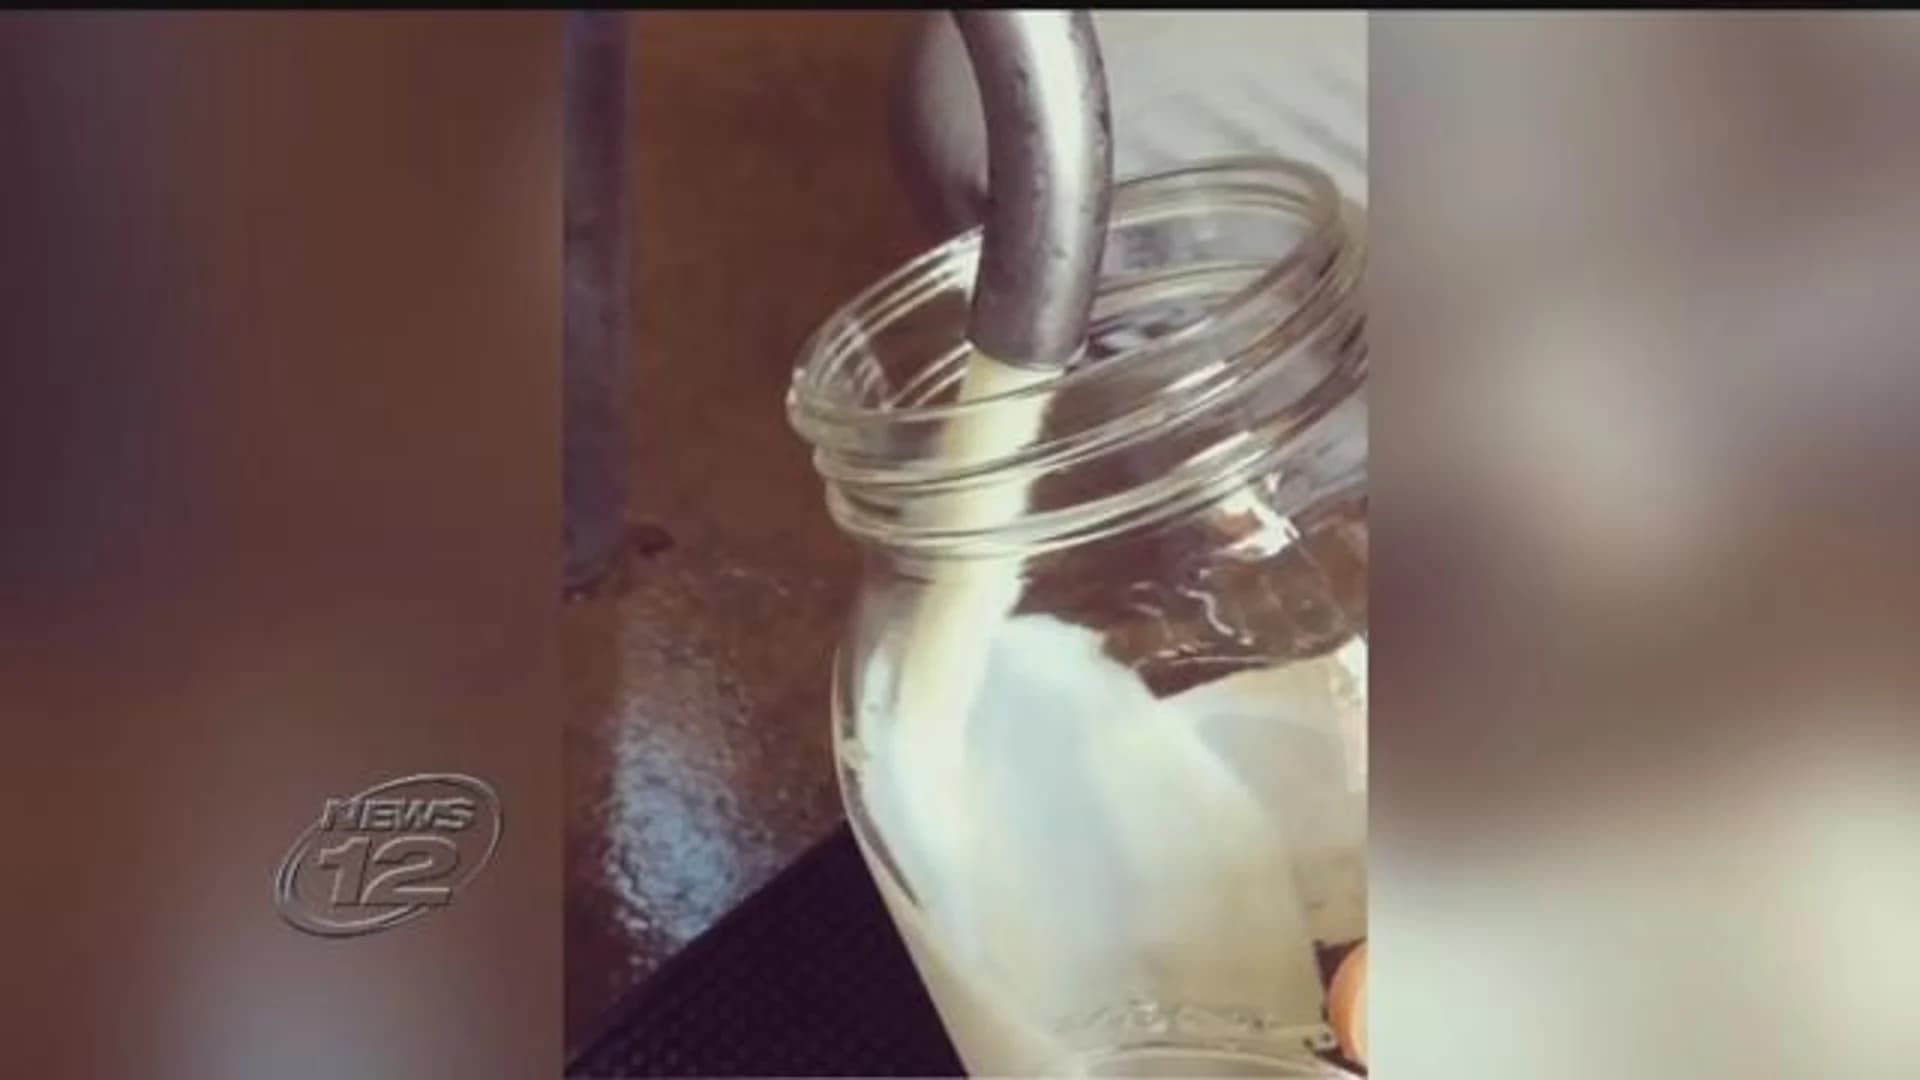 Officials: Unpasteurized milk from Millbrook farm possibly contaminated